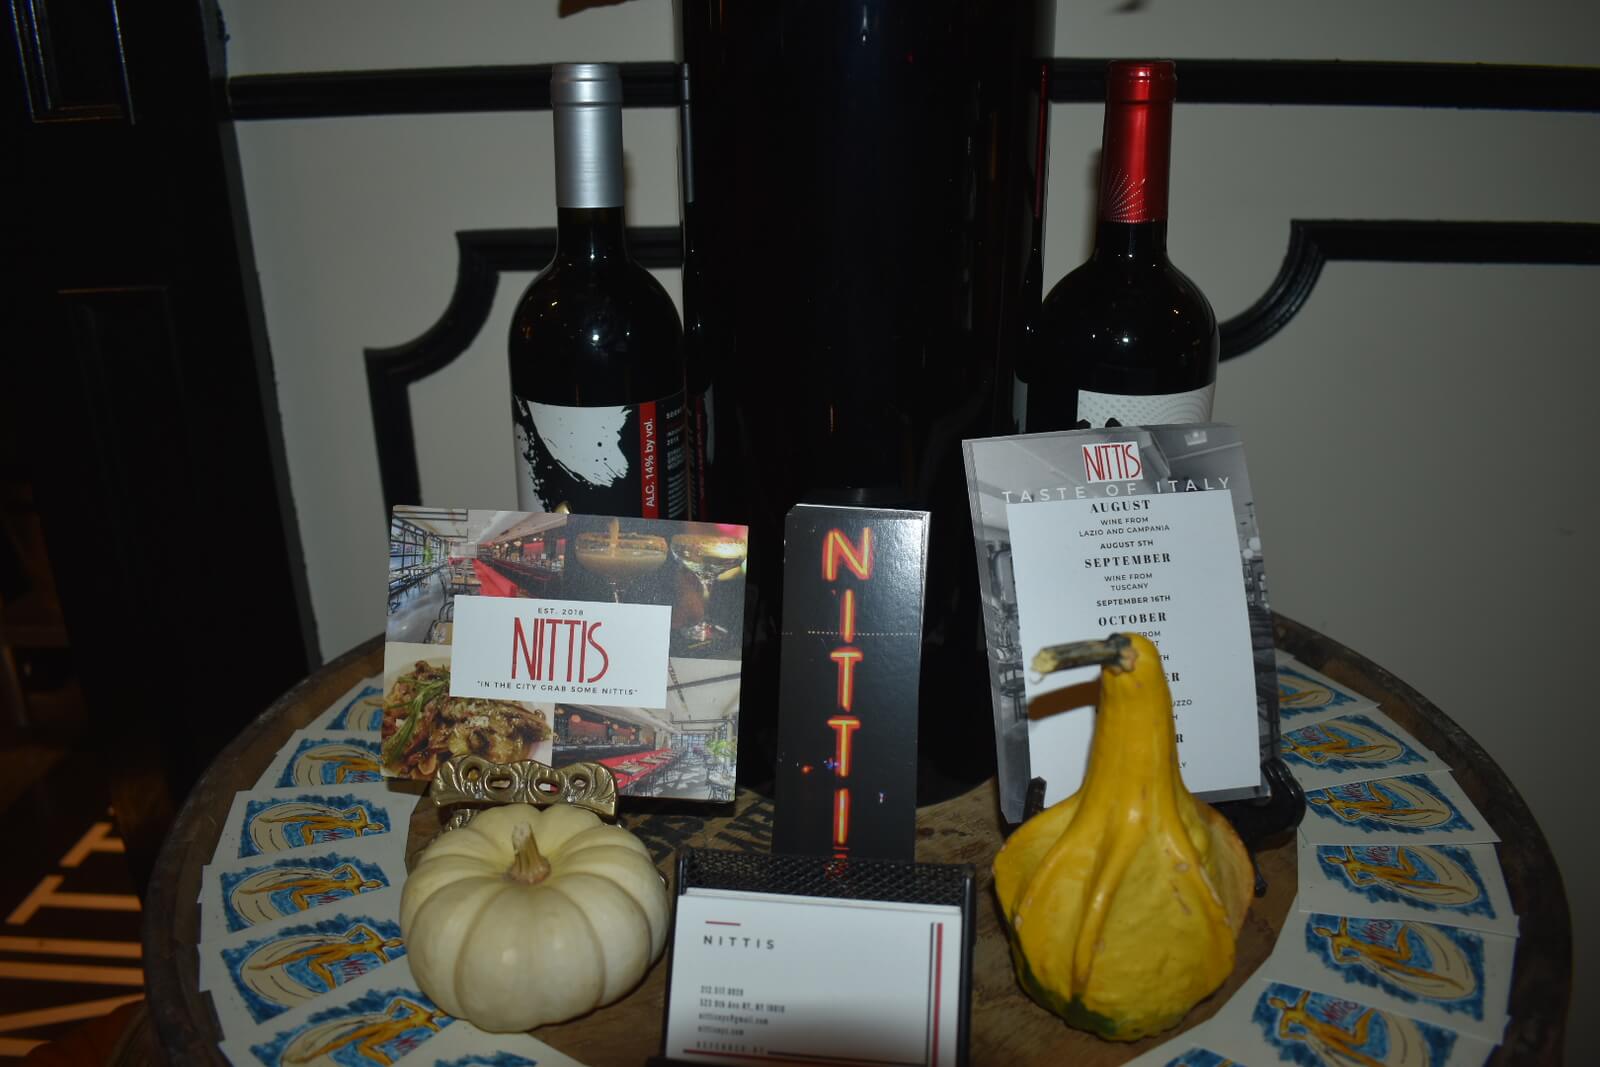 Nittis business cards displayed on a table in front of two bottles of wine and behind a miniature pumpkin and gourd